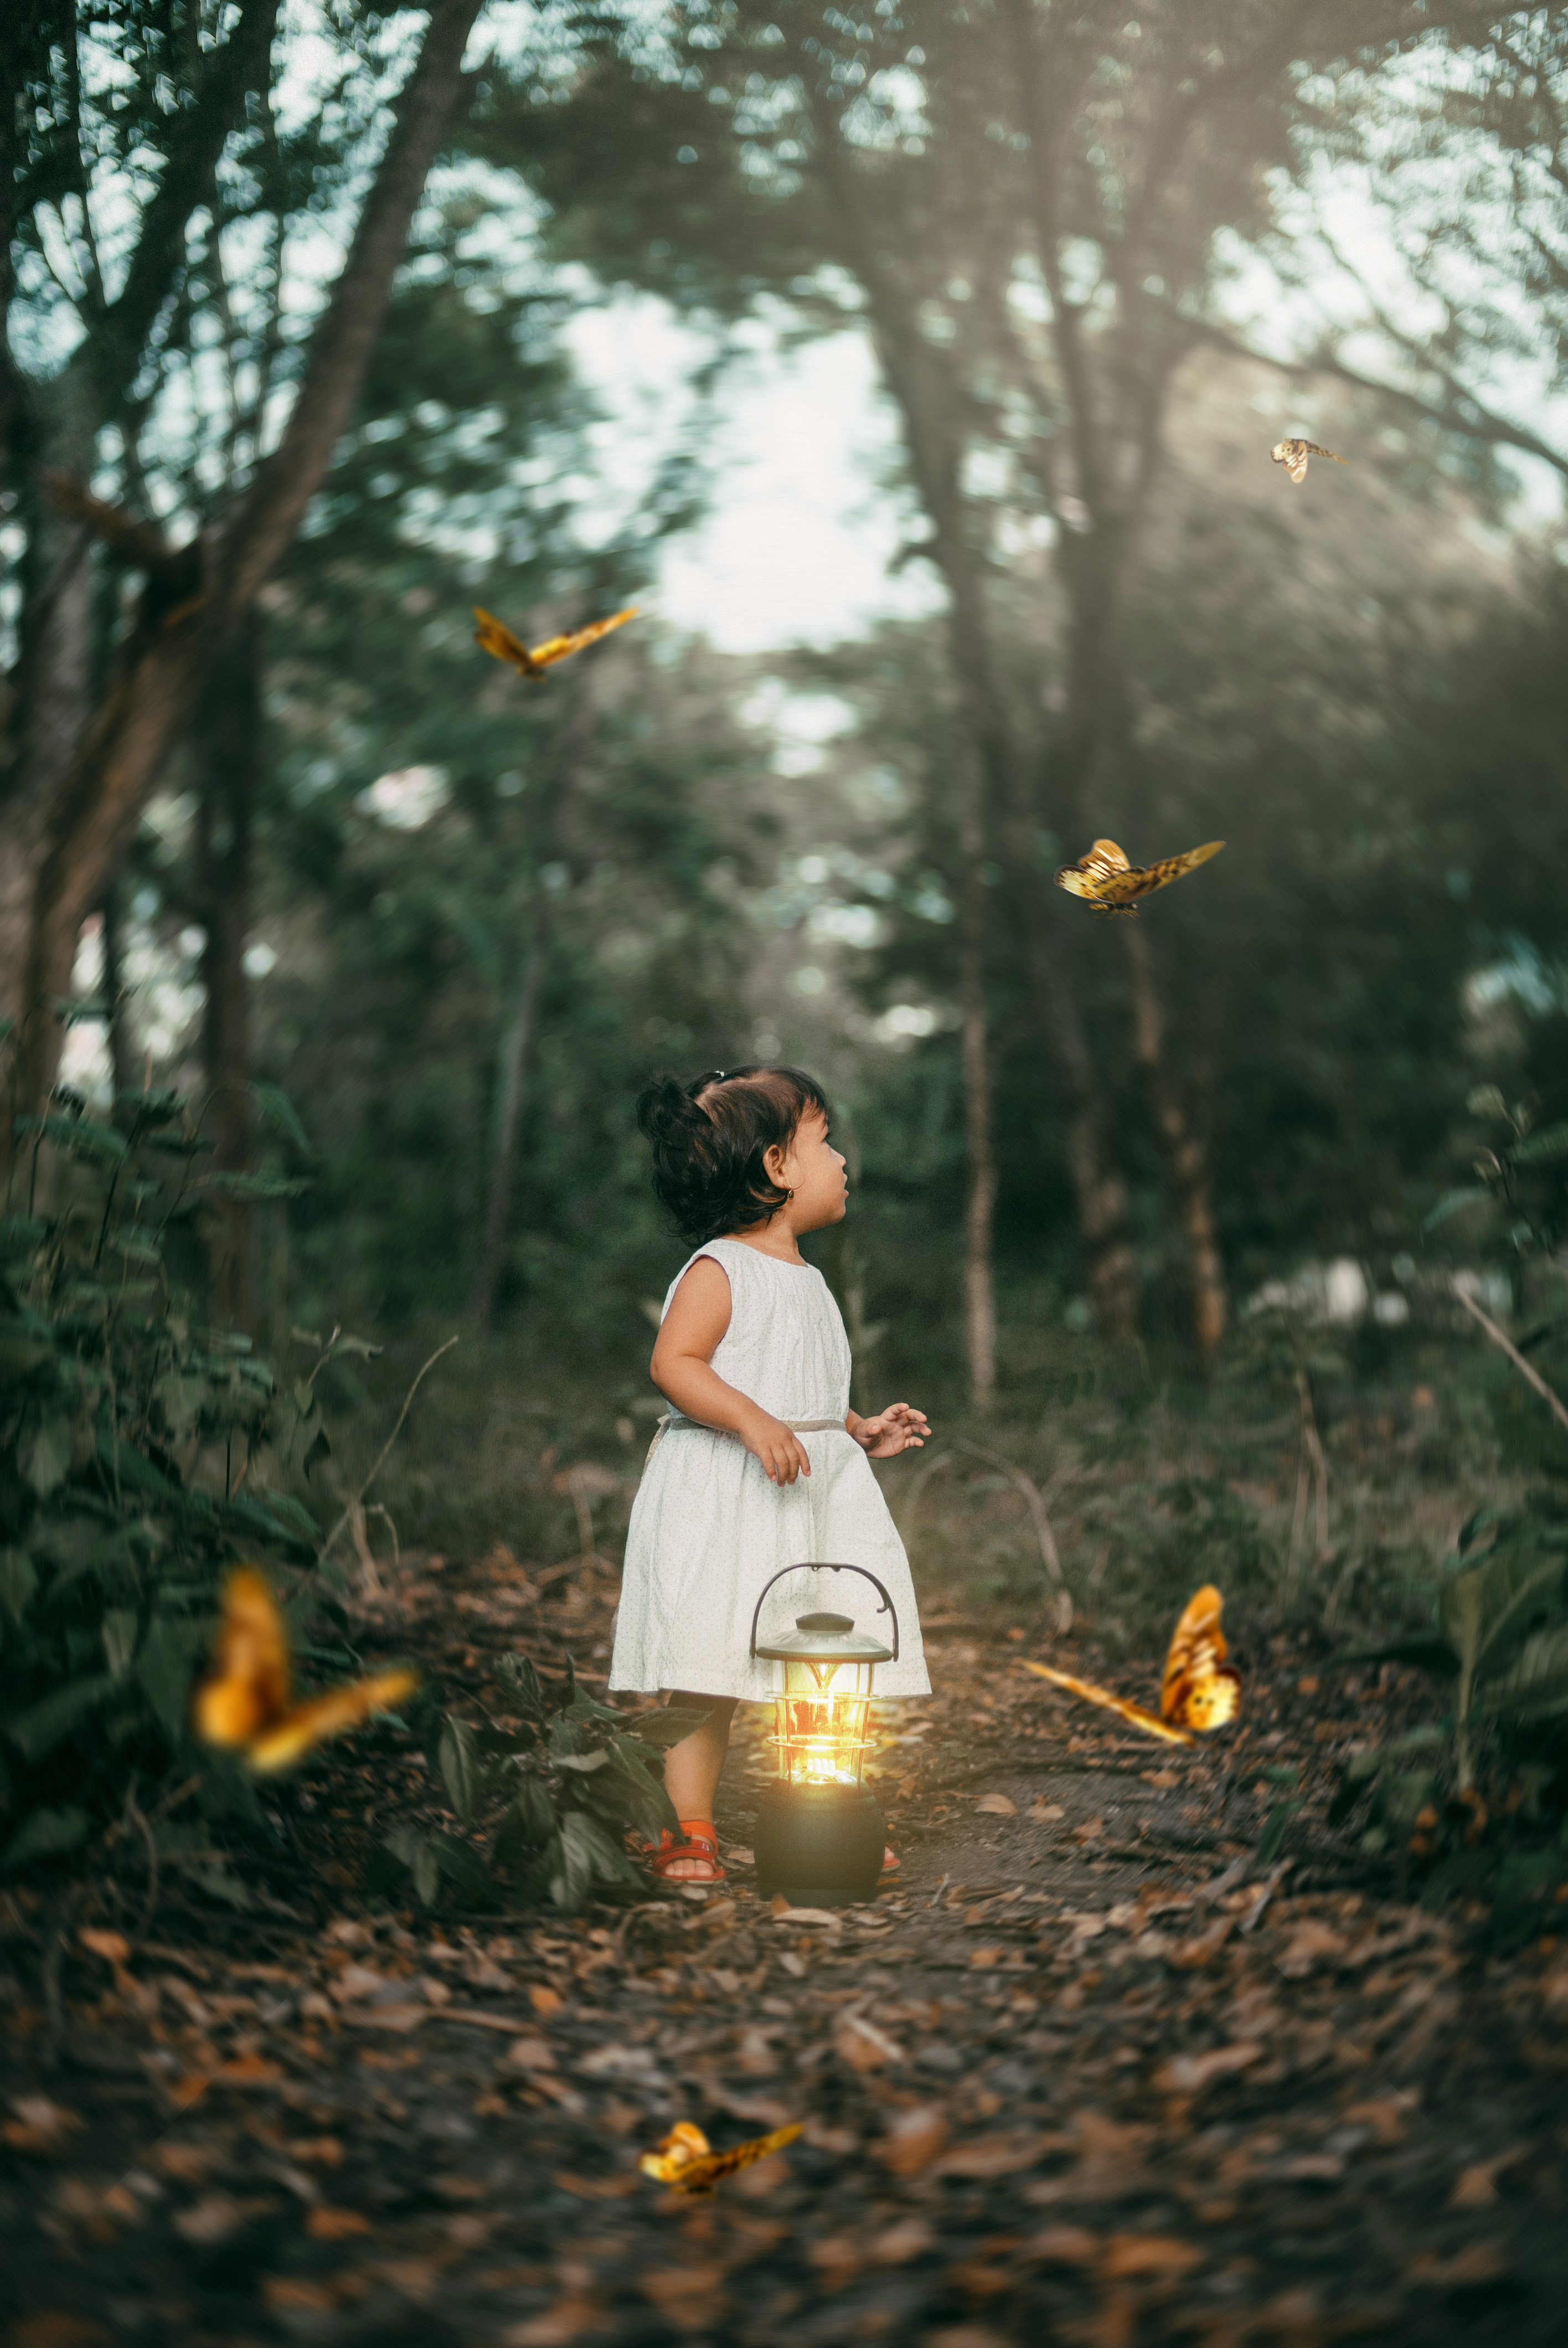 android butterflies, miscellanea, lantern, miscellaneous, forest, path, lamp, child